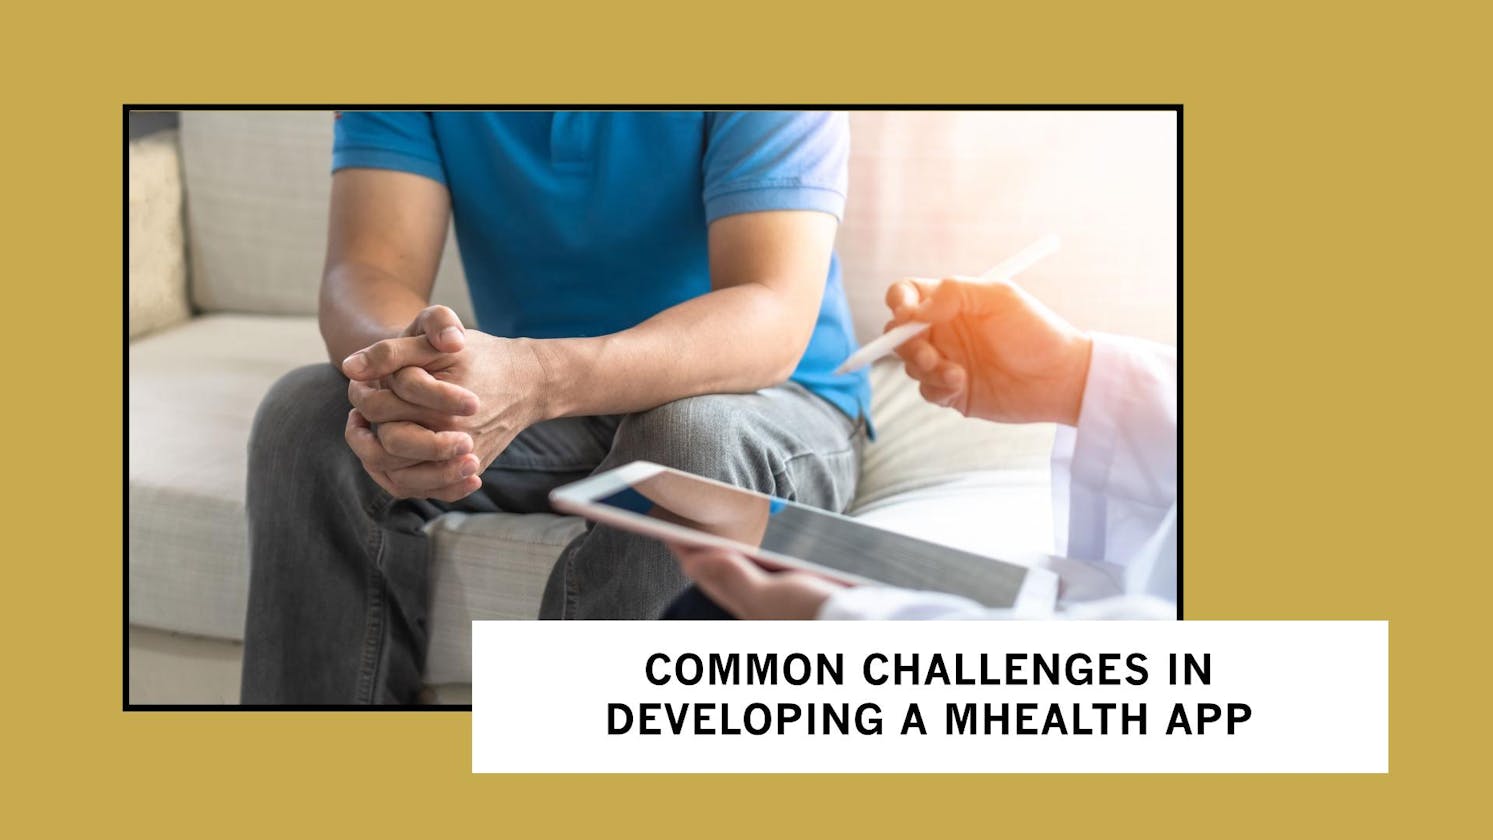 Common challenges in developing a mhealth app